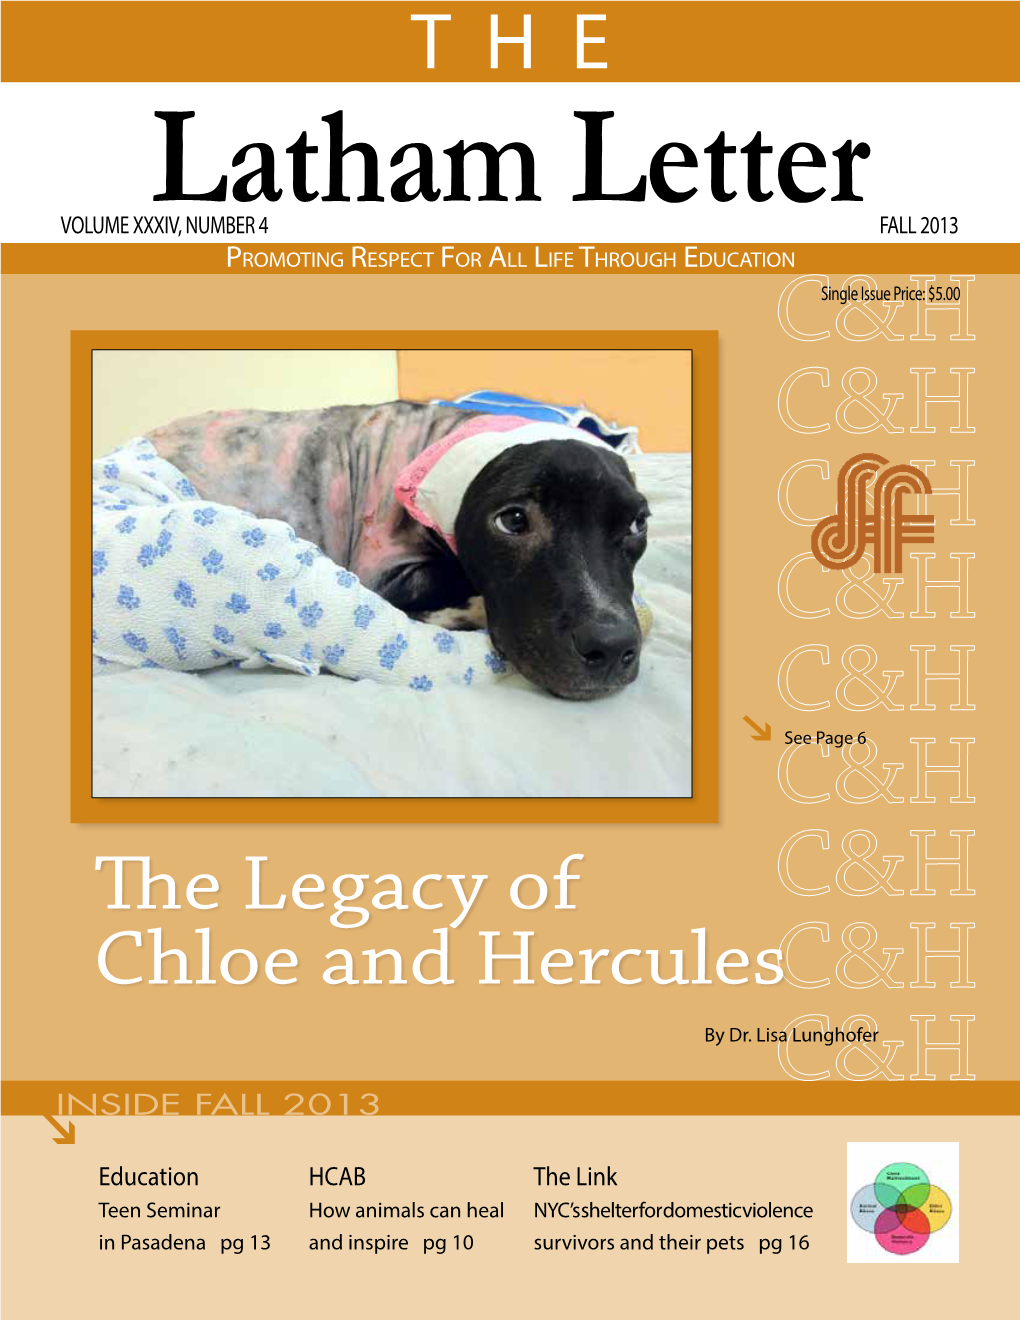 Latham Letter Balanced Perspectives on Humane Issues and Activities Subscriptions:$15 One Year US; $25 Two Years US